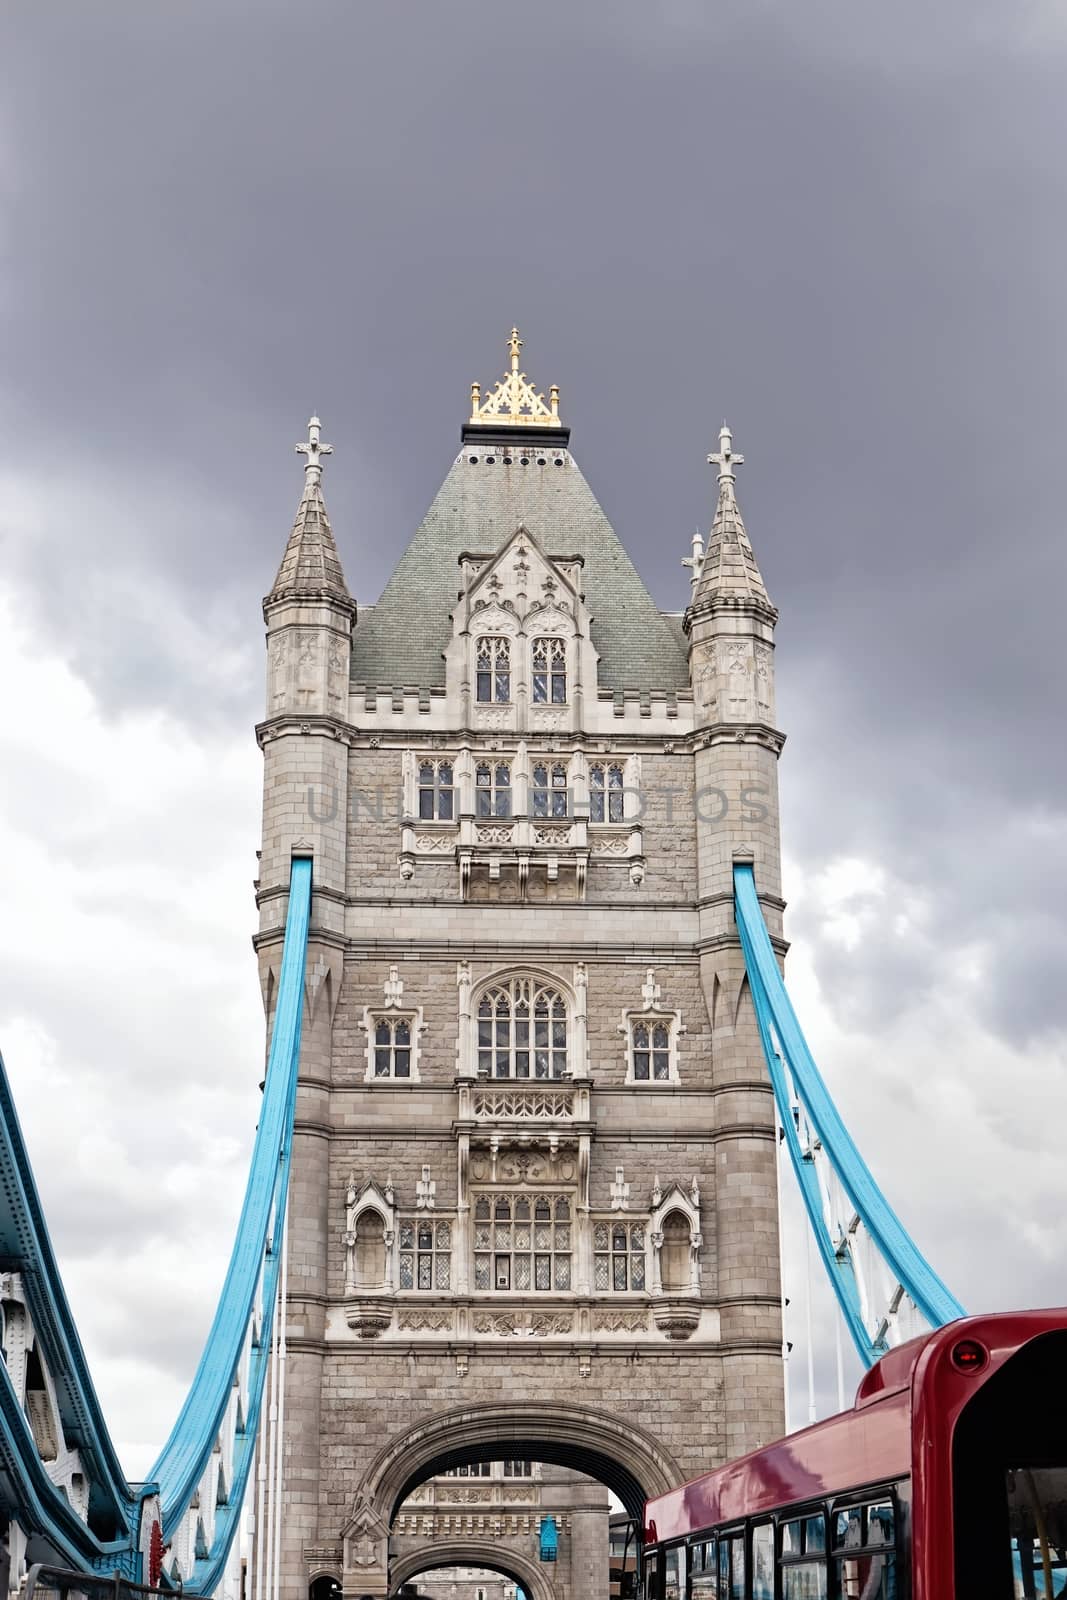 Tower Bridge (built 1886–1894) is a combined bascule and suspension bridge in London which crosses the River Thames.